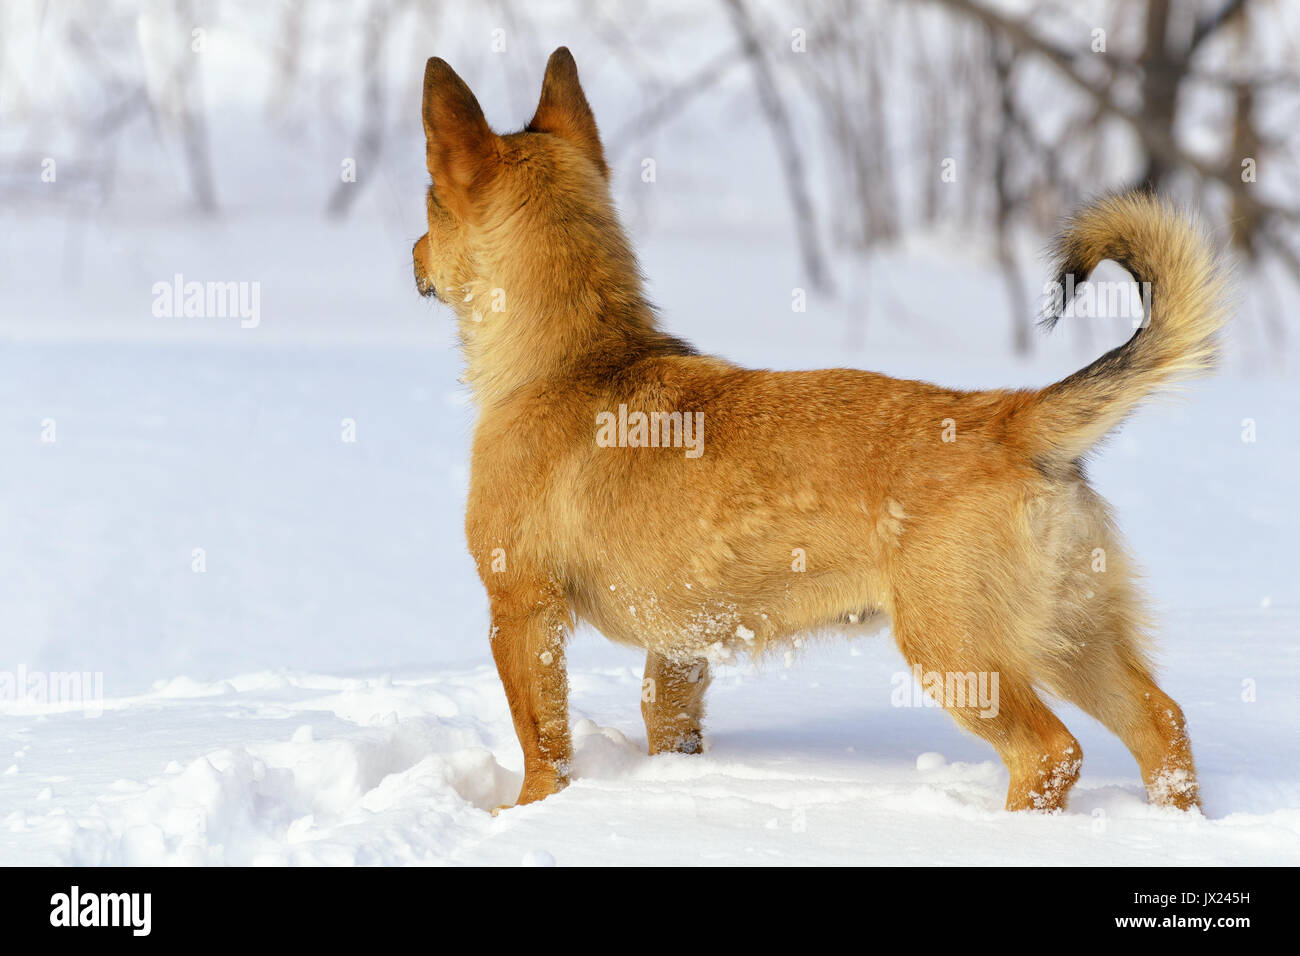 Ginger Little Dog Looking Fixedly Ahead at Winter Day Stock Photo